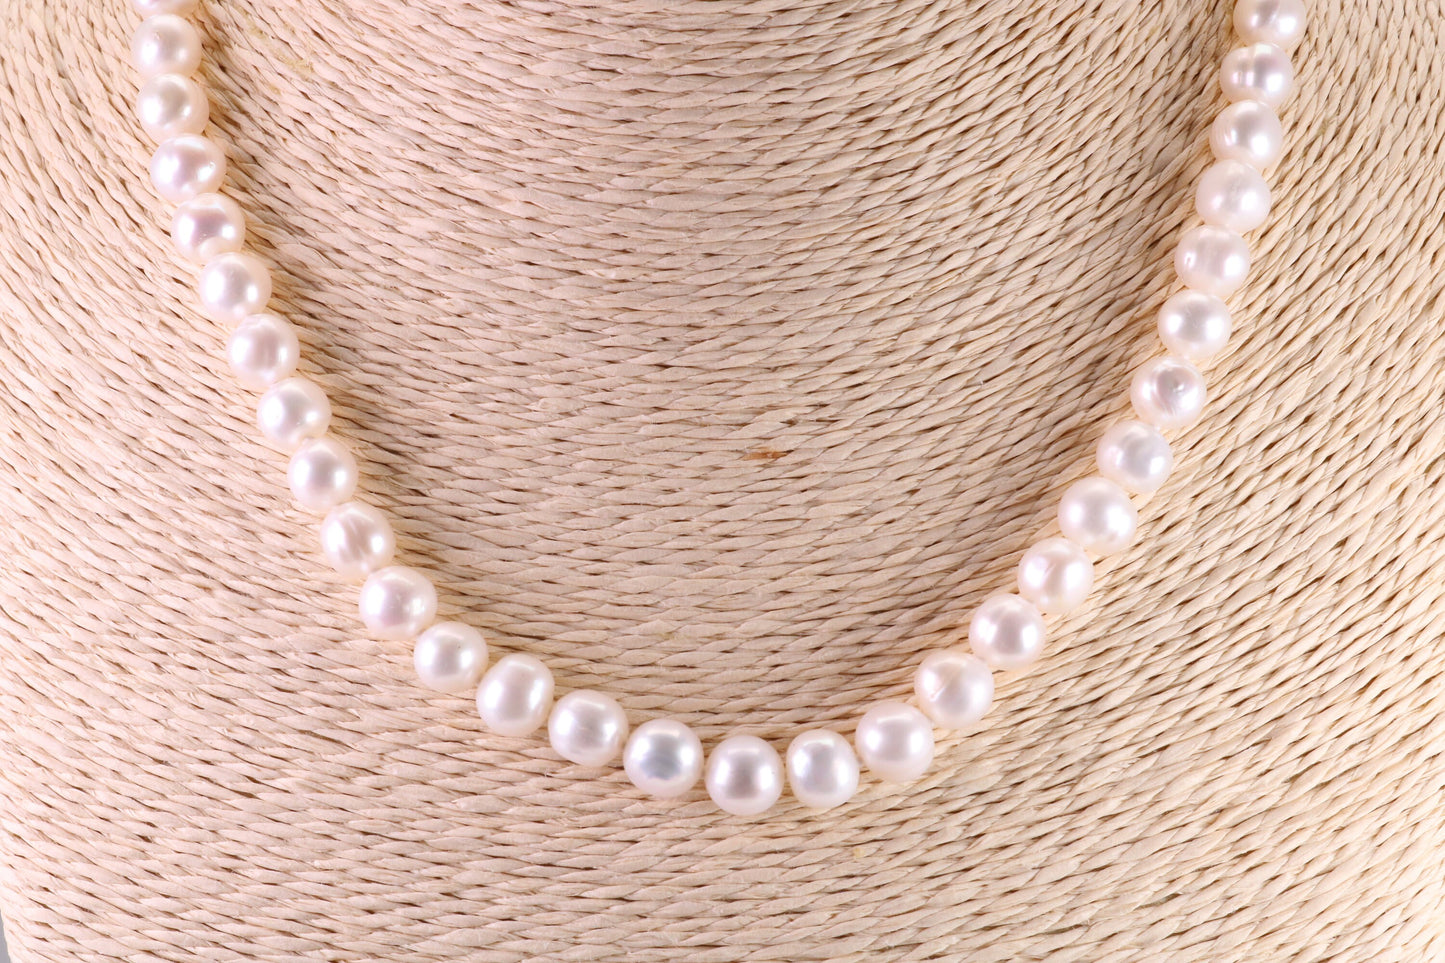 25 Inches Long Single Strand Natural 8 mm Round Pearl Necklace set in Silver